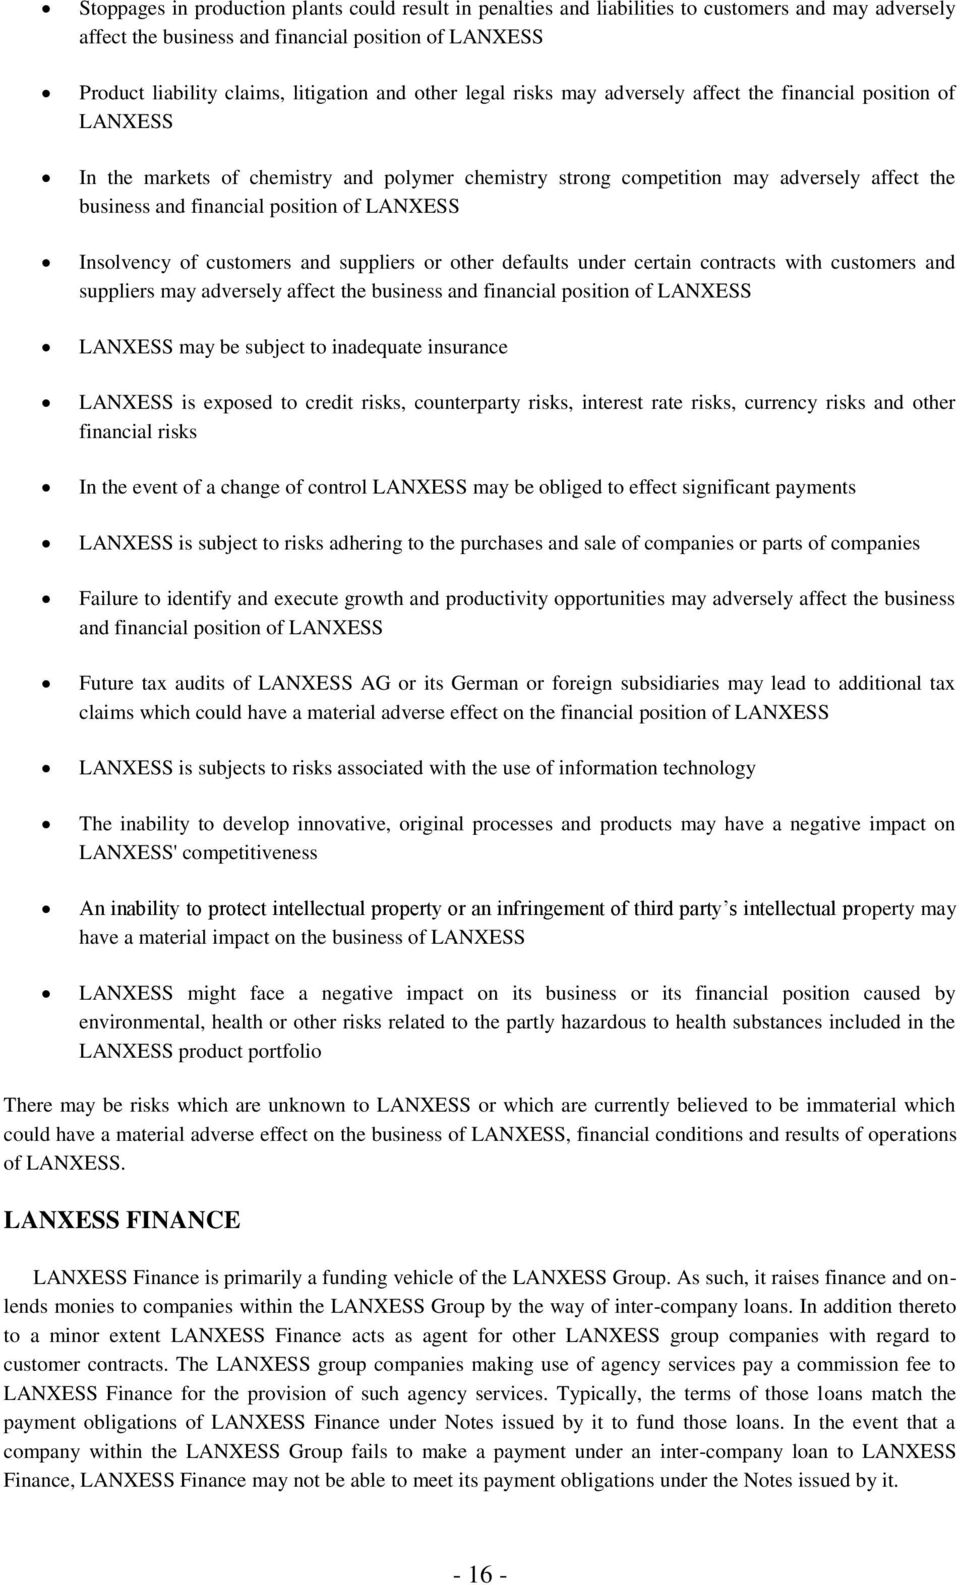 of LANXESS Insolvency of customers and suppliers or other defaults under certain contracts with customers and suppliers may adversely affect the business and financial position of LANXESS LANXESS may